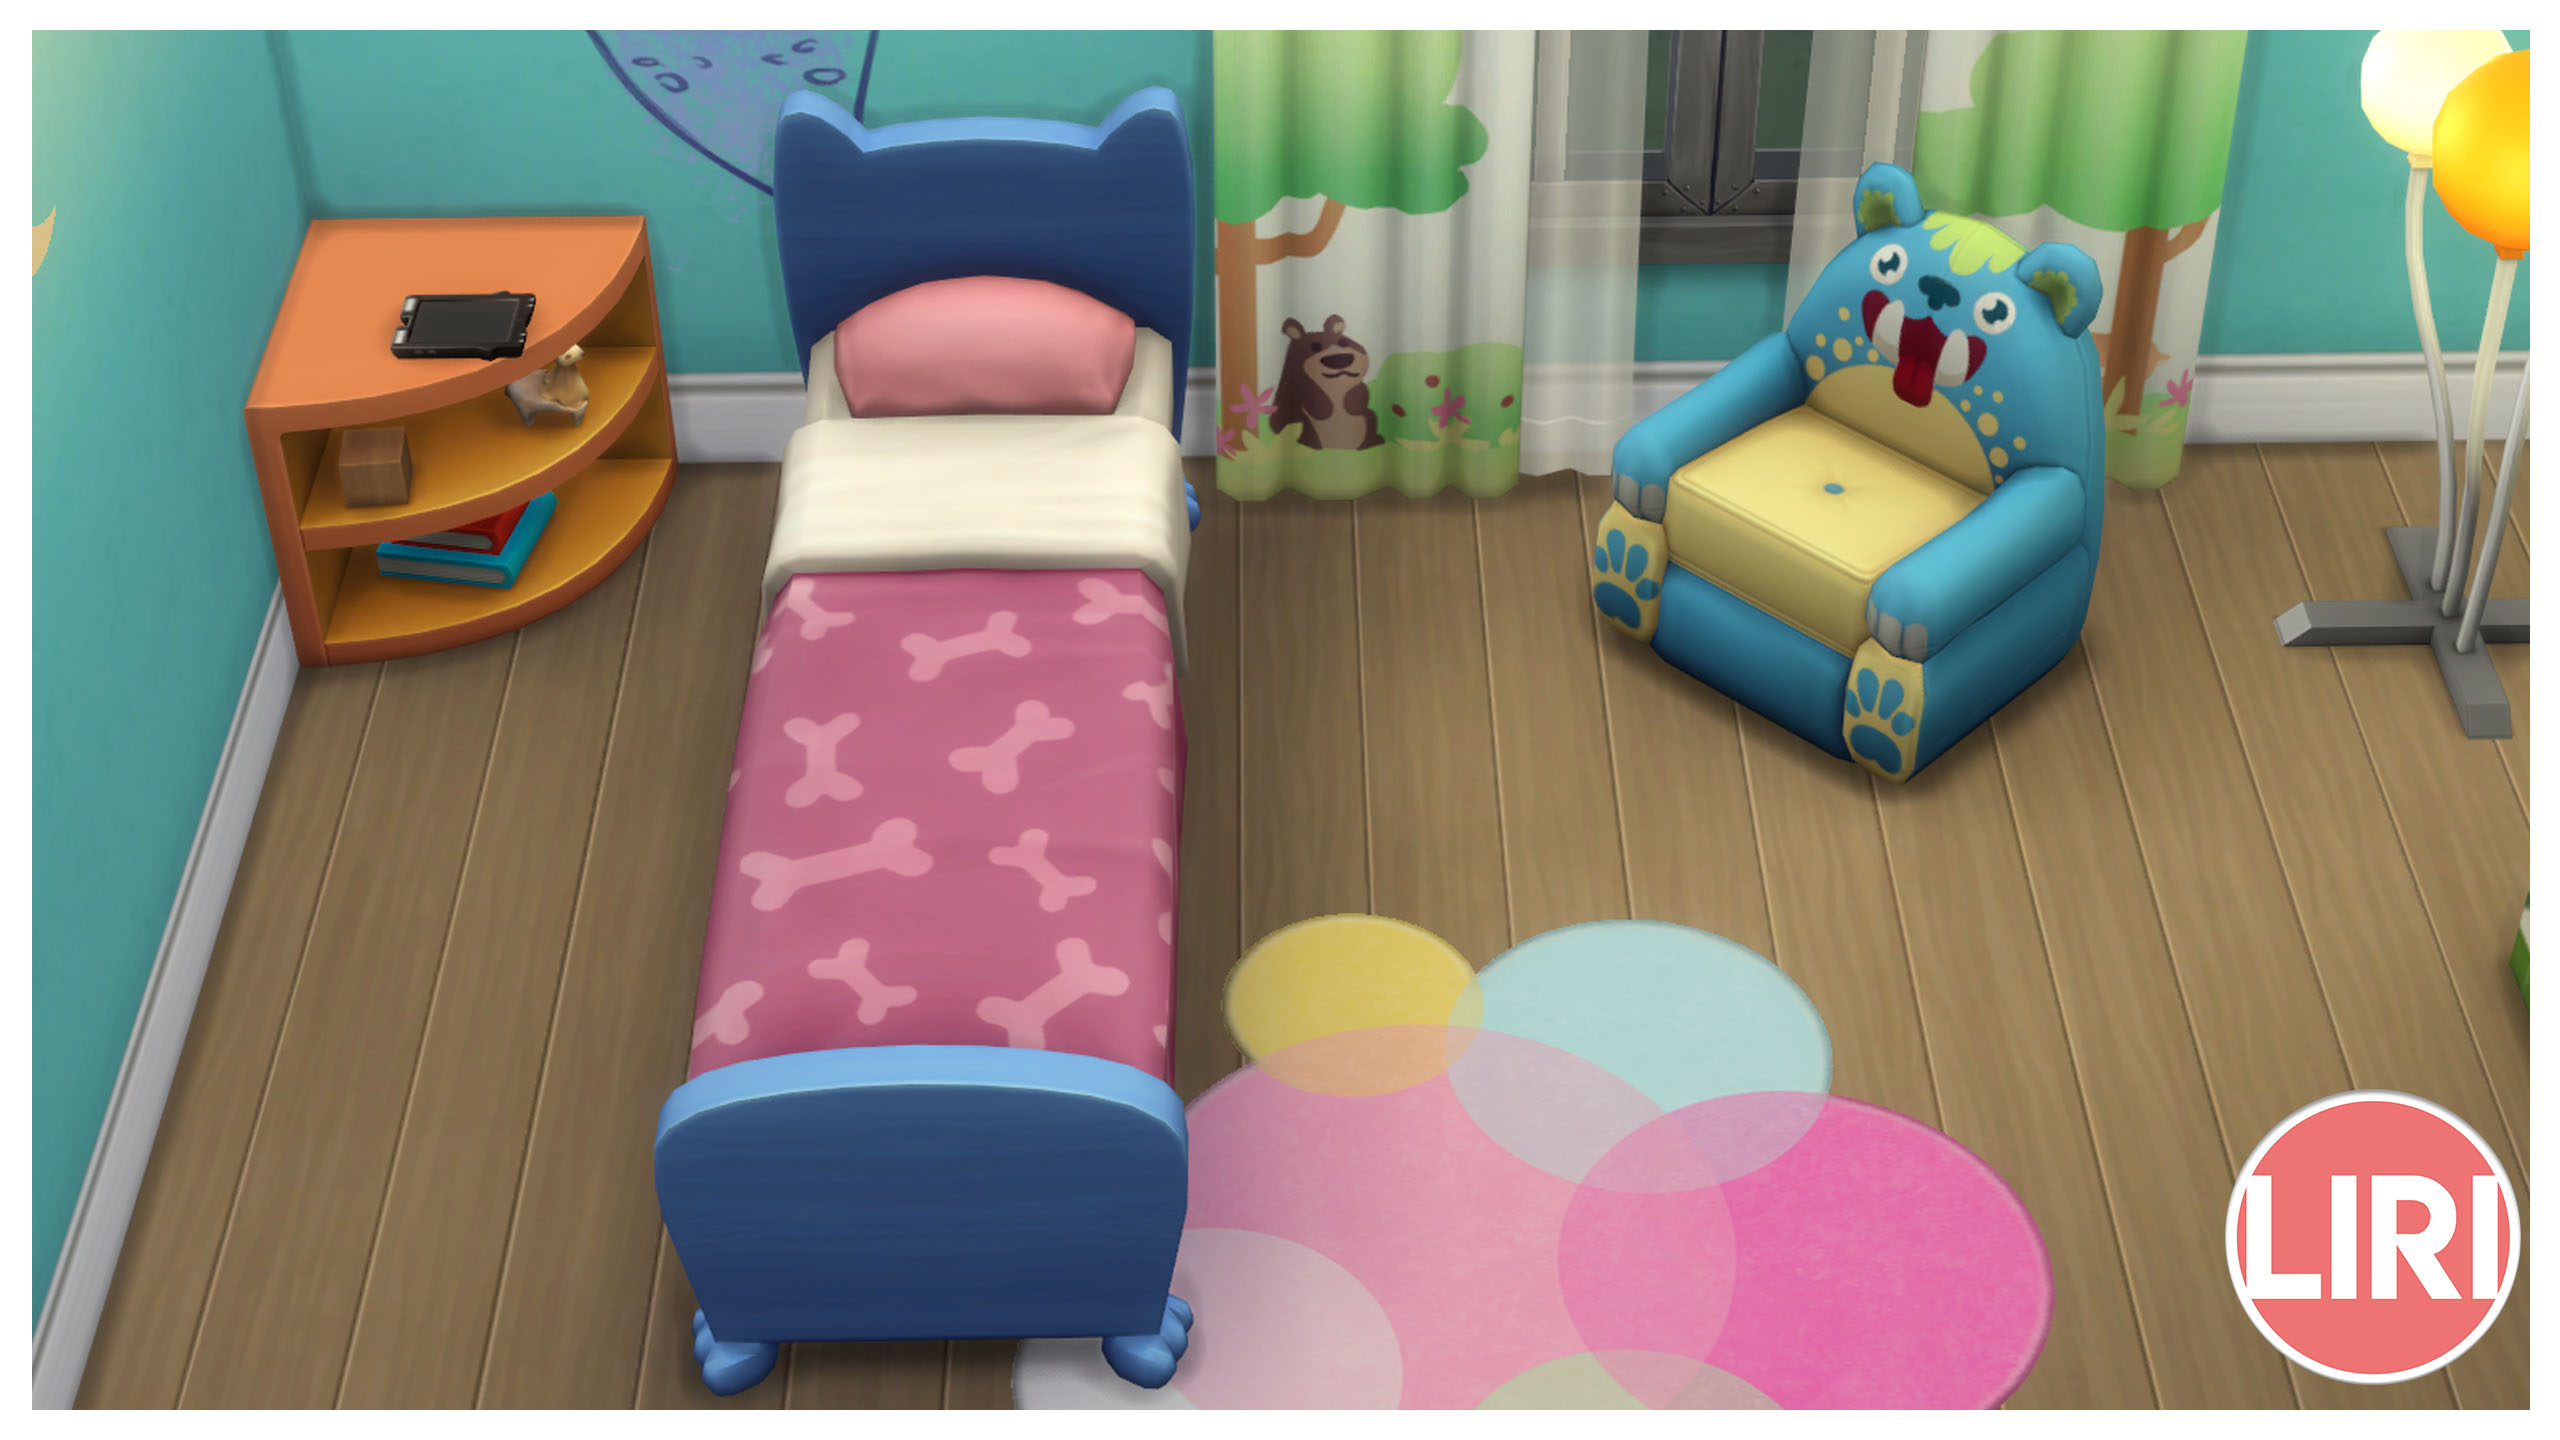 Mod The Sims - Mr. Woof and Mrs. Meow's Child Bed Separated